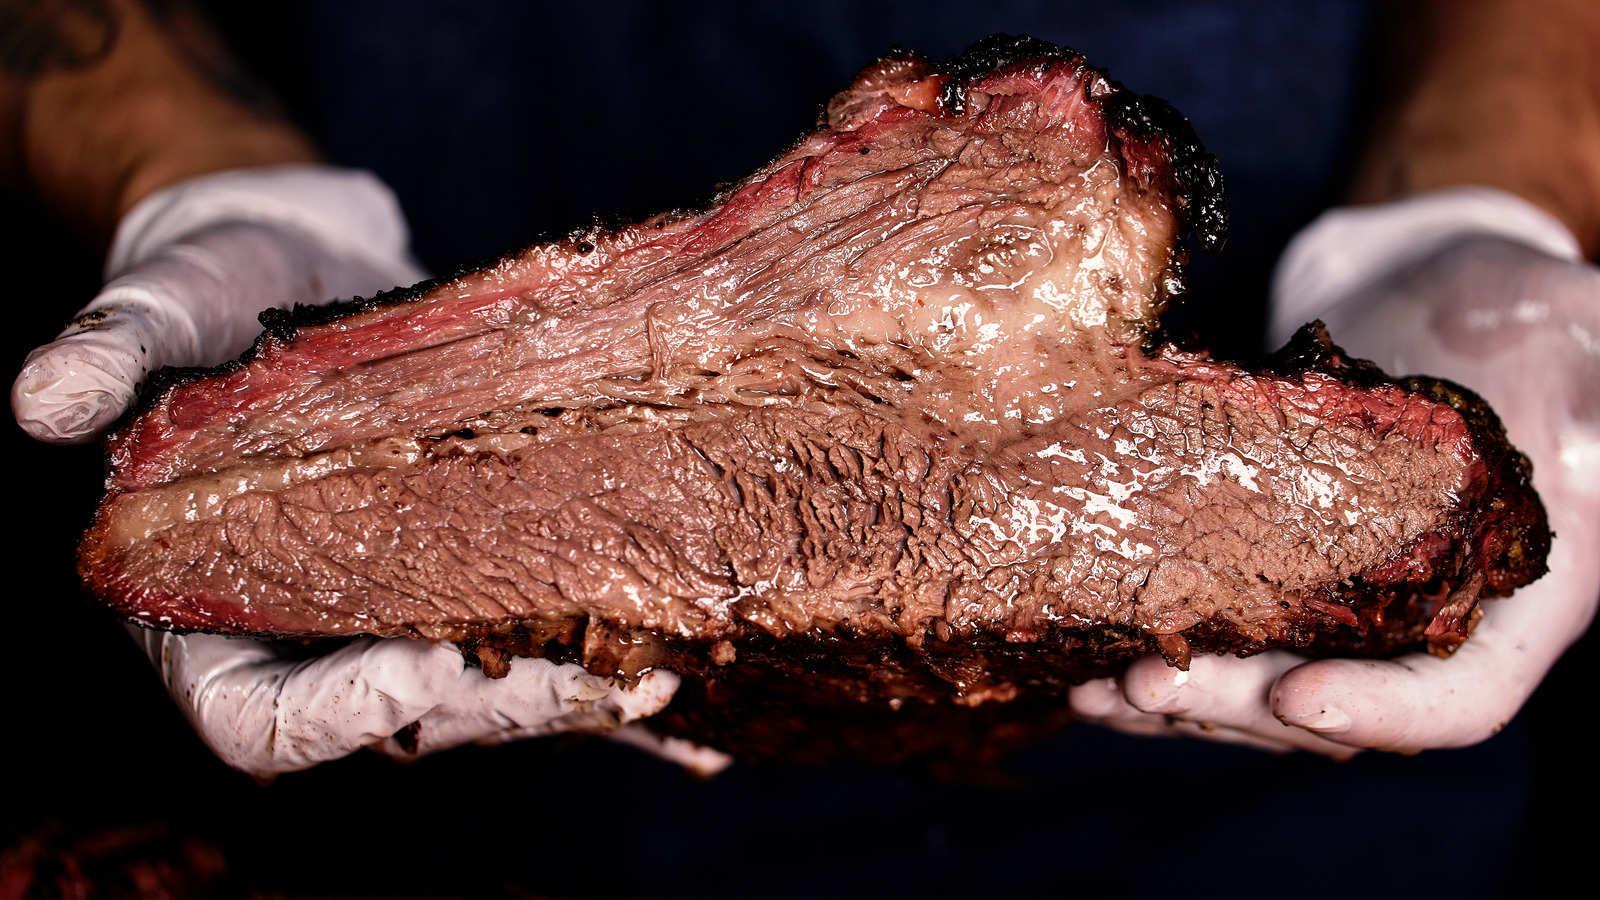 https://www.tastingtable.com/img/gallery/why-you-should-be-careful-when-saucing-smoked-meat/l-intro-1665760428.jpg